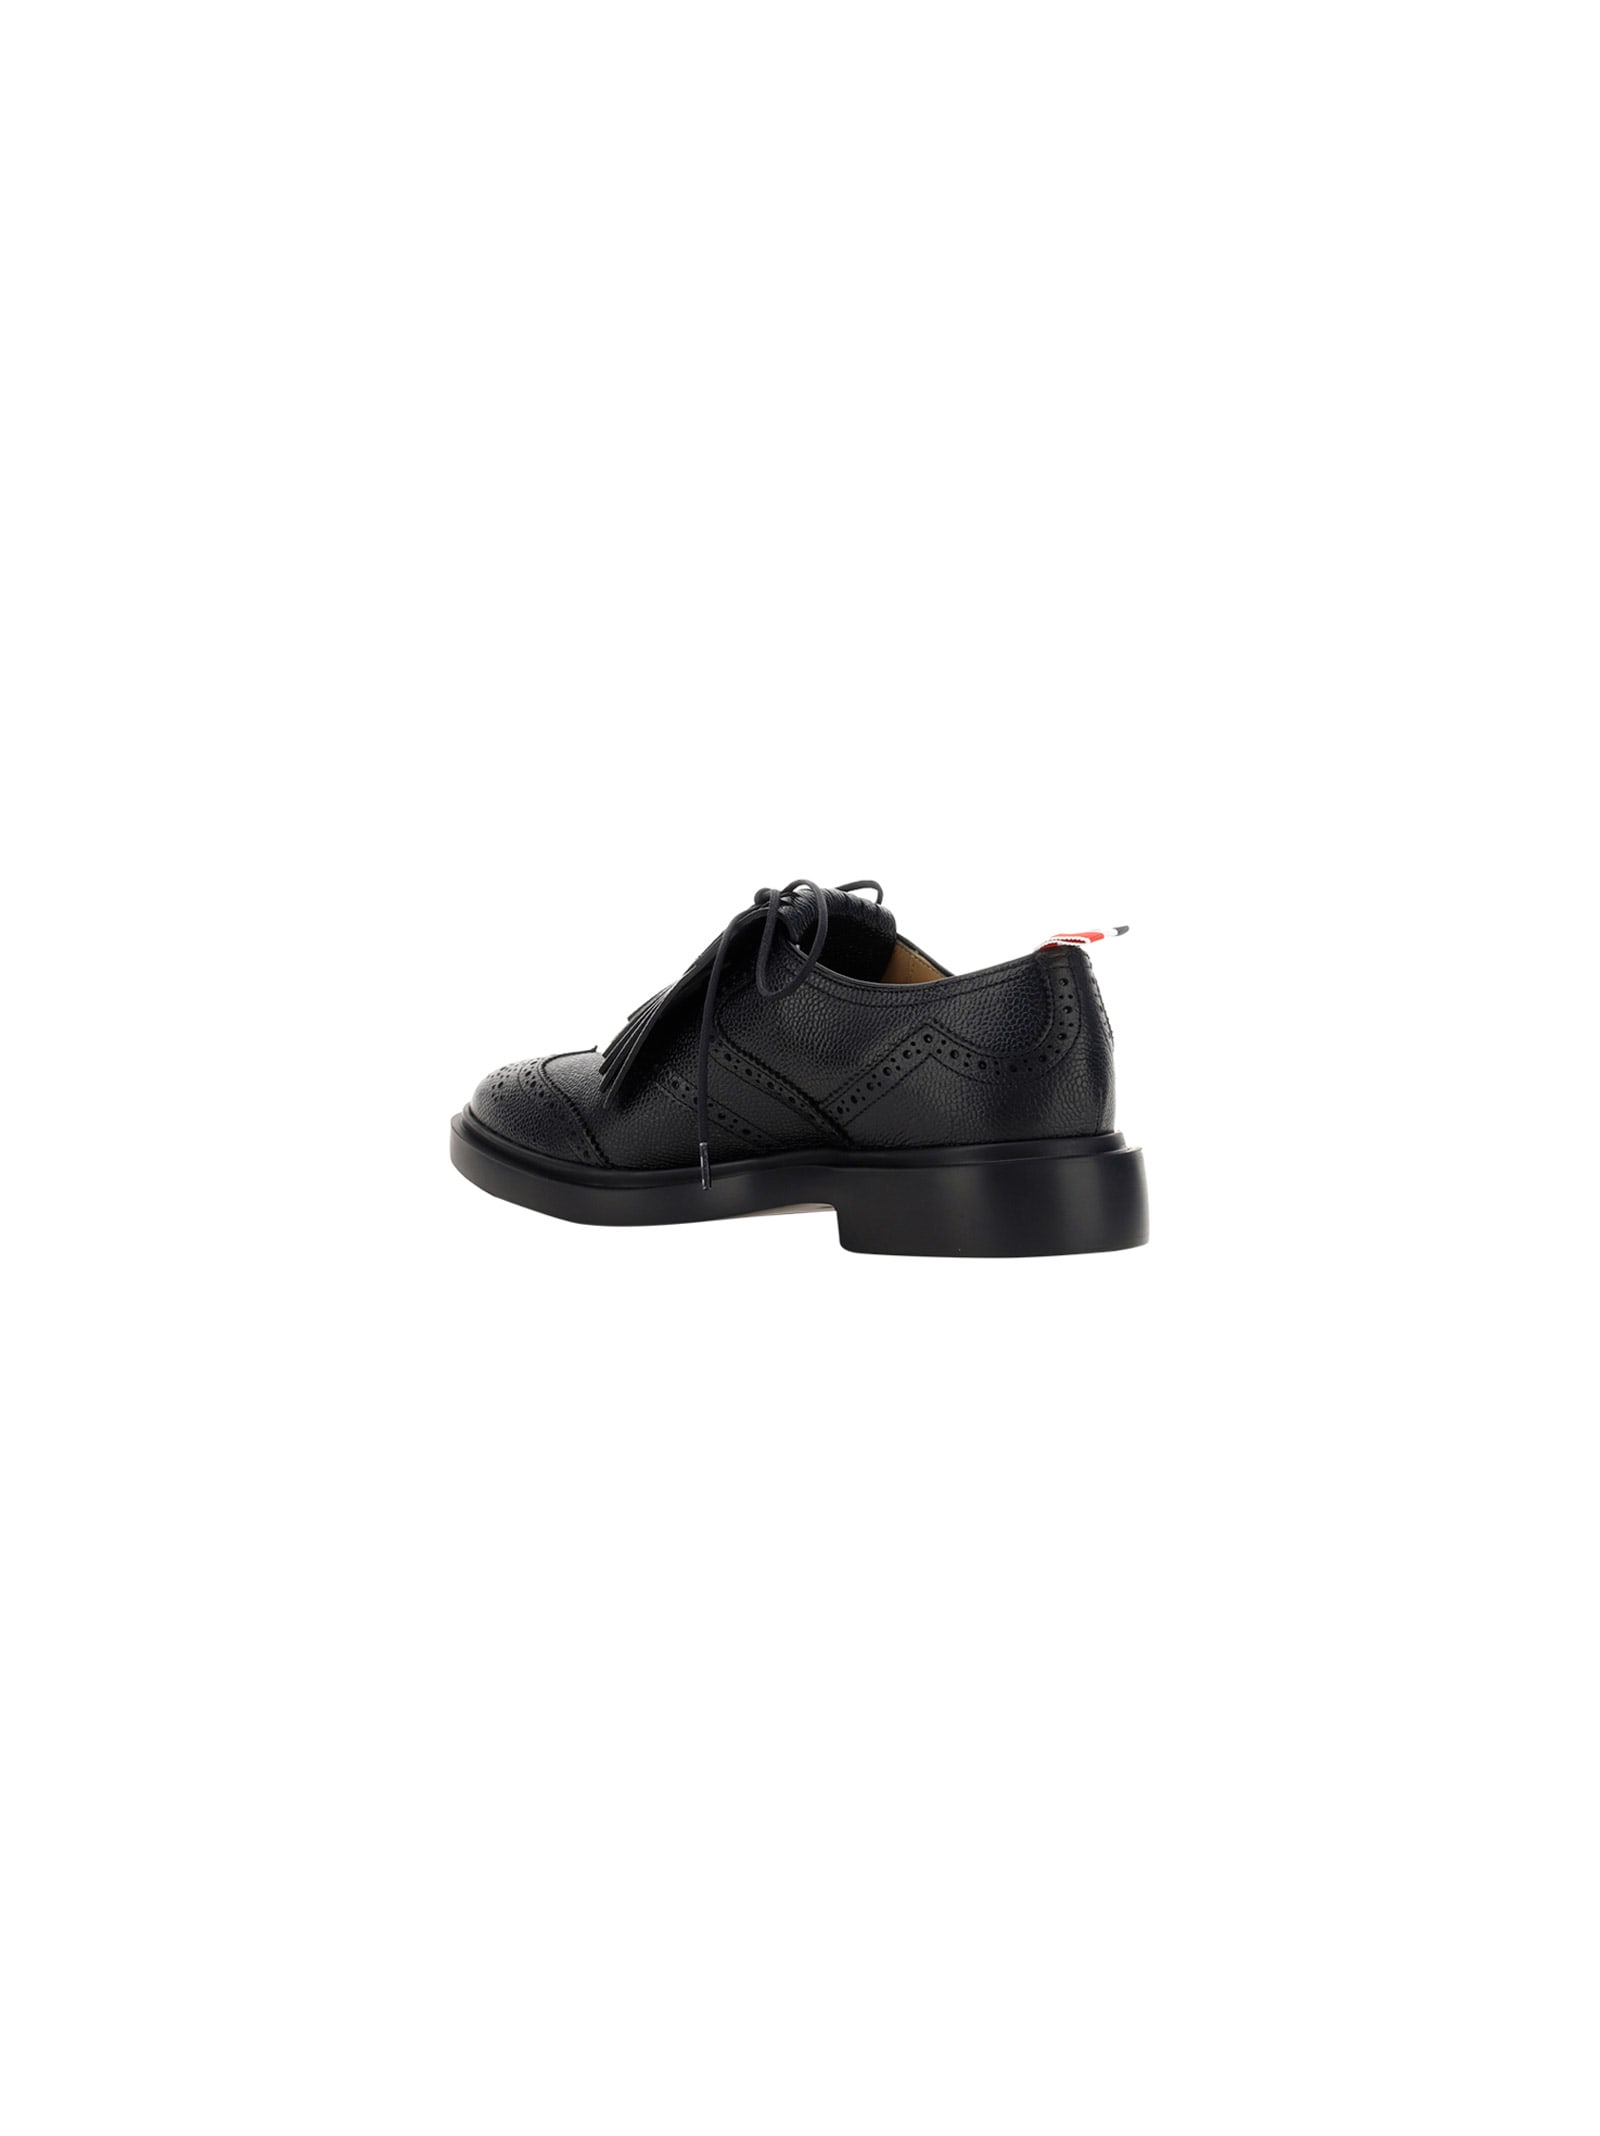 Thom Browne Kilt Lace-up Shoes In Black | ModeSens